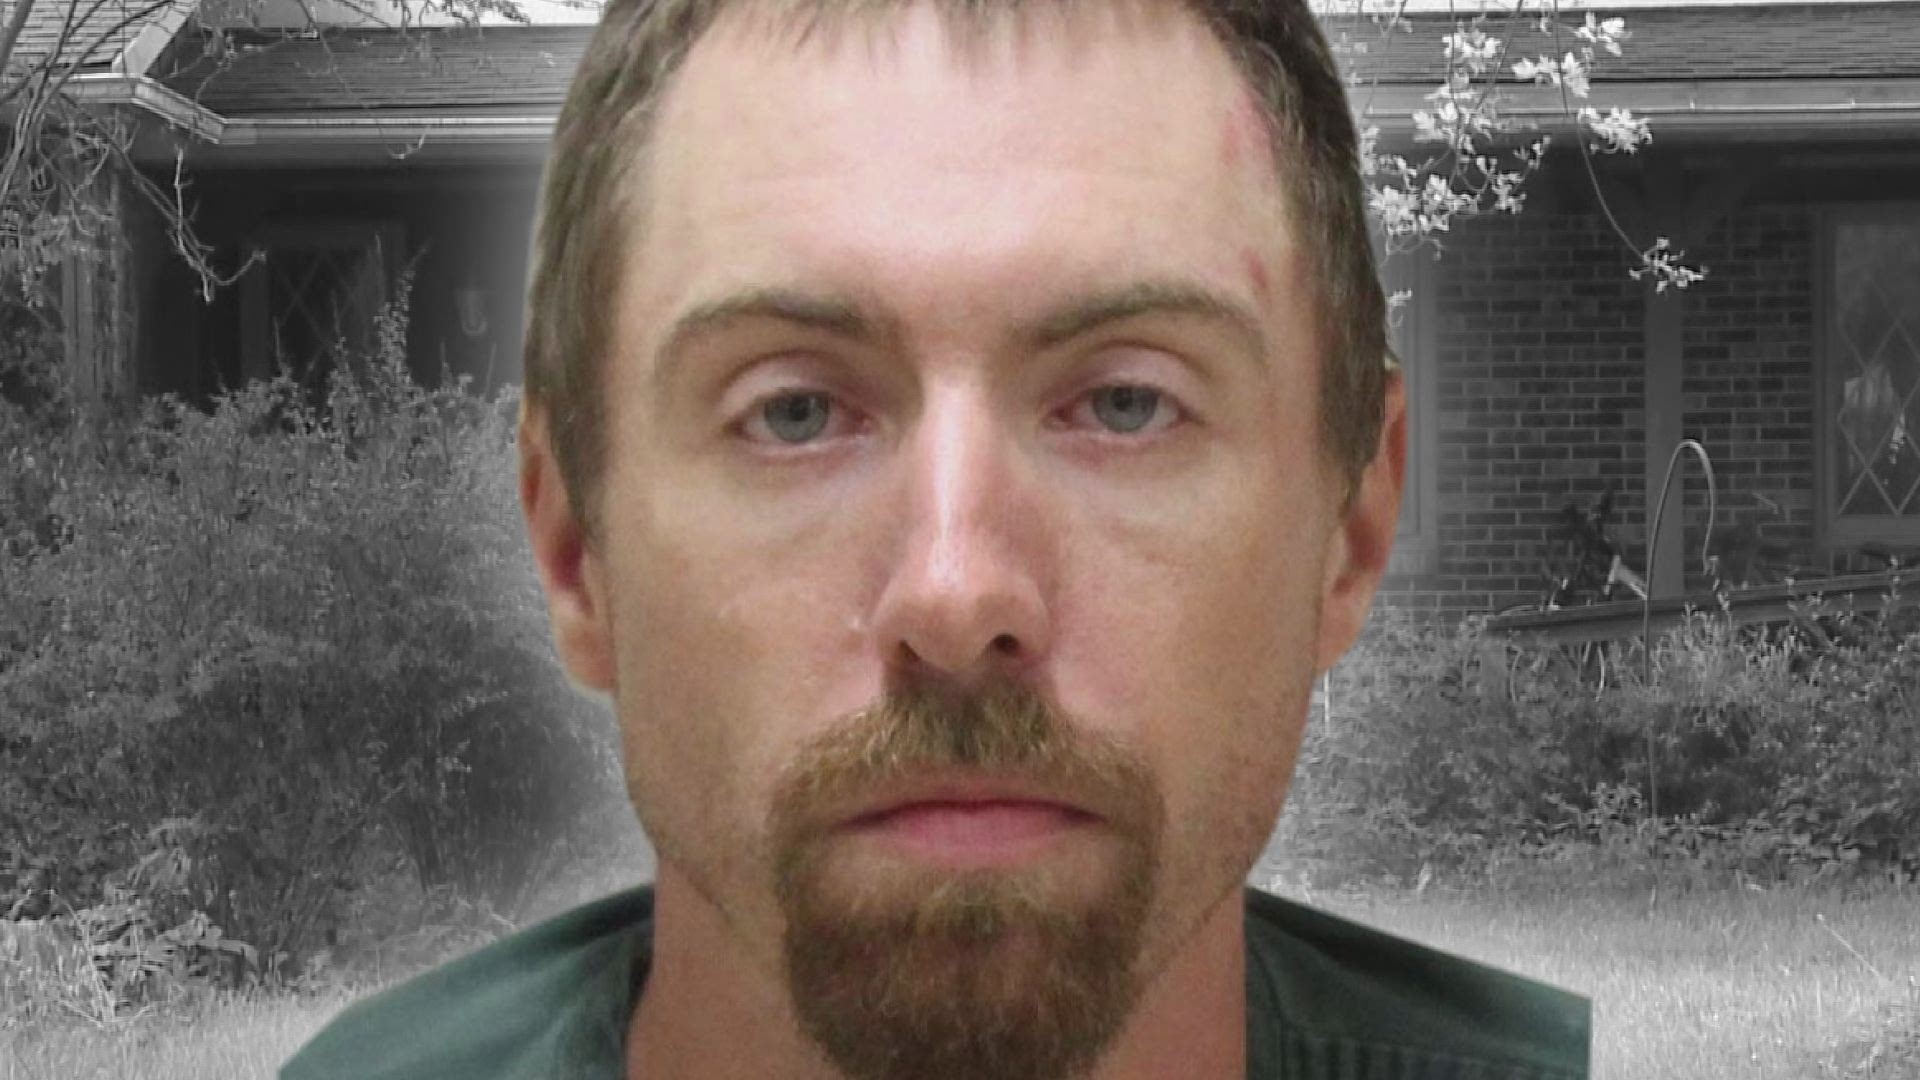 Nathan S. Board entered the Kent County home of his in-laws in 2018 and stood over the sleeping couple for 45 minutes before killing them with a hammer.